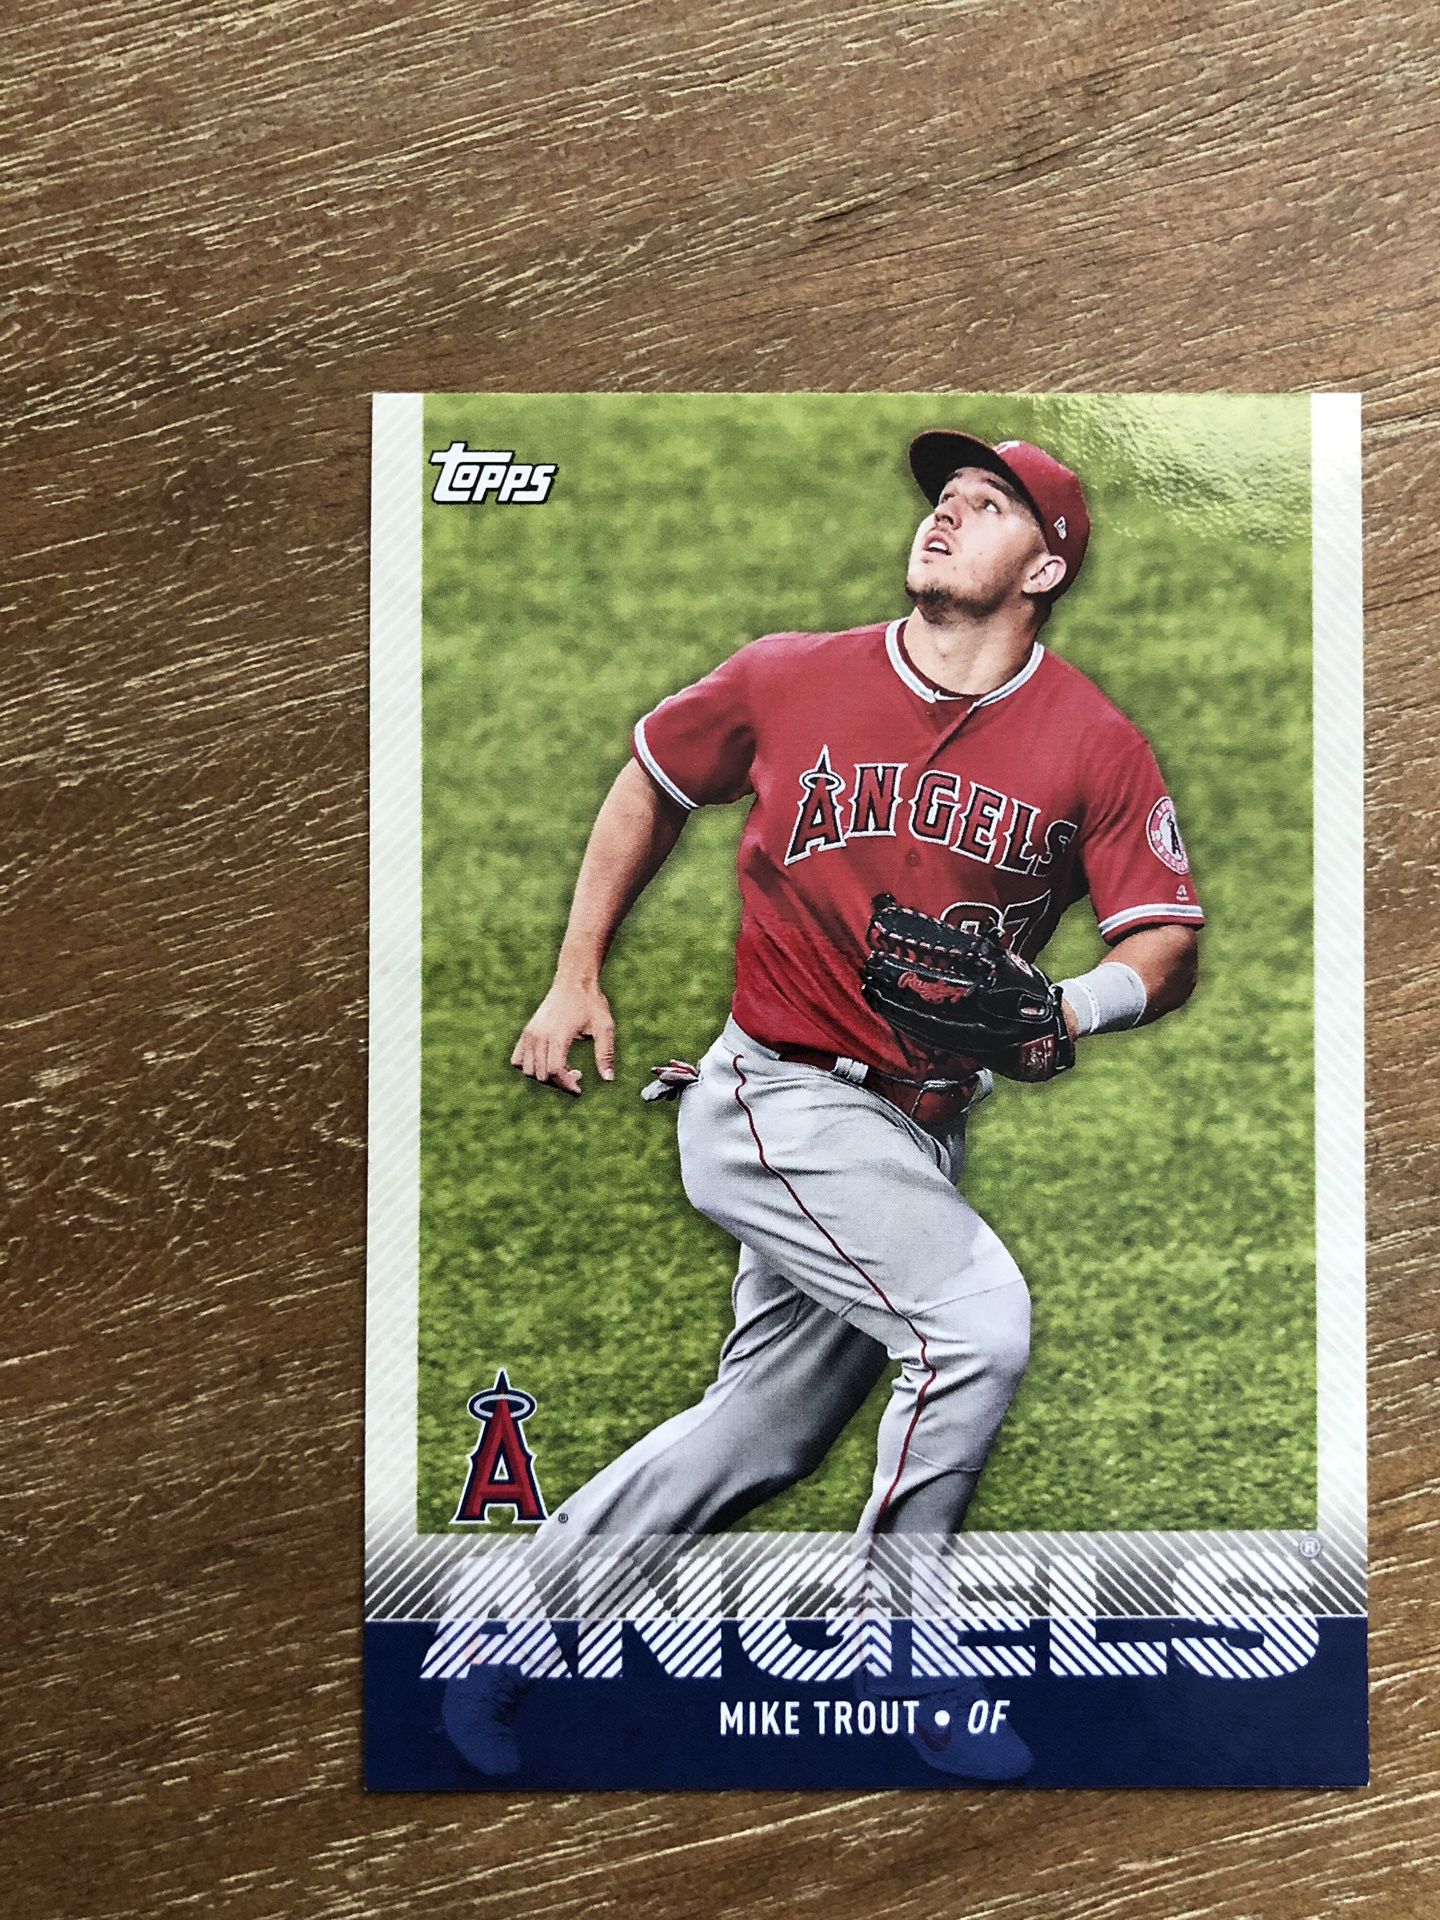 2020 Topps UTZ Potato Chips Regional Promo #59 Mike Trout Angels Baseball Card